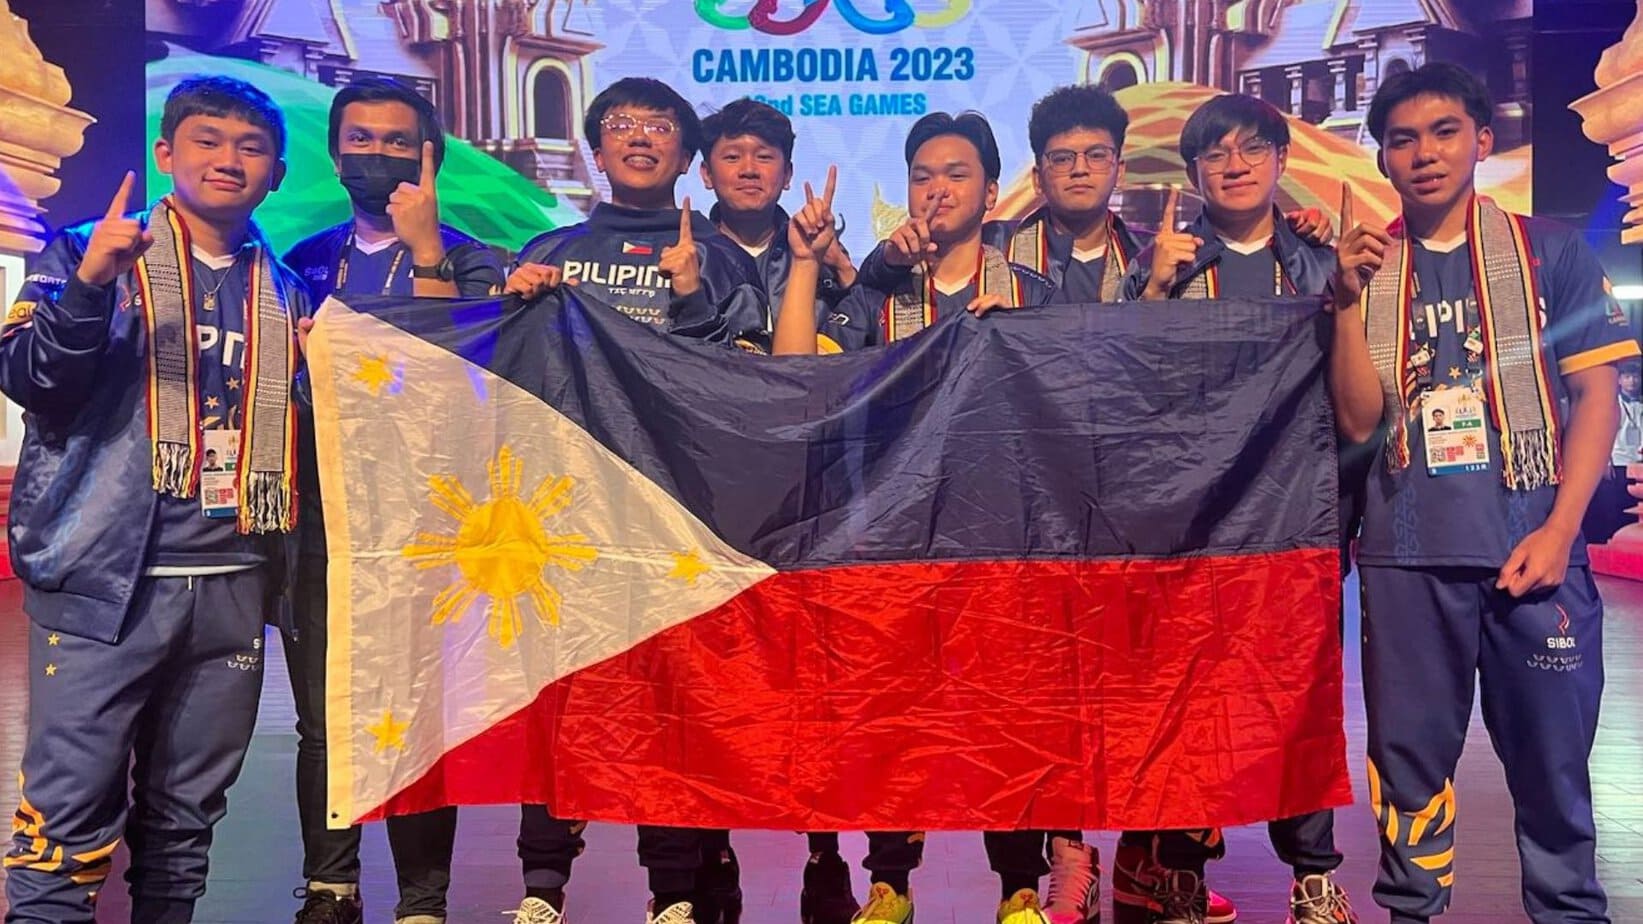 SIBOL’s MLBB team wins third gold medal in a row at the 32nd SEA Games - ONE Esports